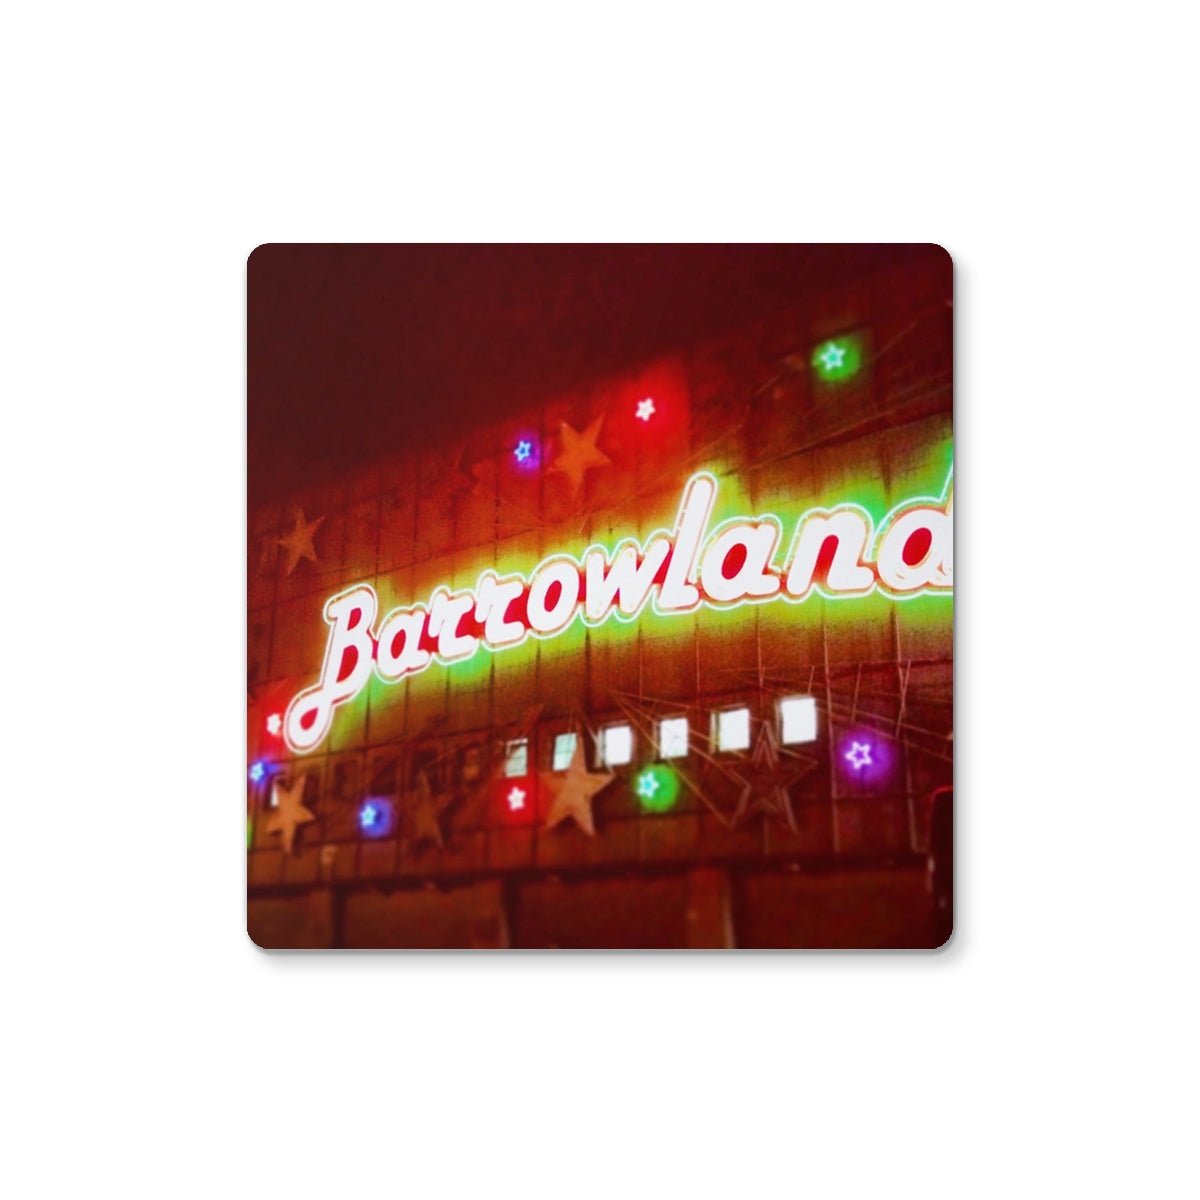 A Neon Glasgow Barrowlands Art Gifts Coaster-Coasters-Edinburgh & Glasgow Art Gallery-6 Coasters-Paintings, Prints, Homeware, Art Gifts From Scotland By Scottish Artist Kevin Hunter